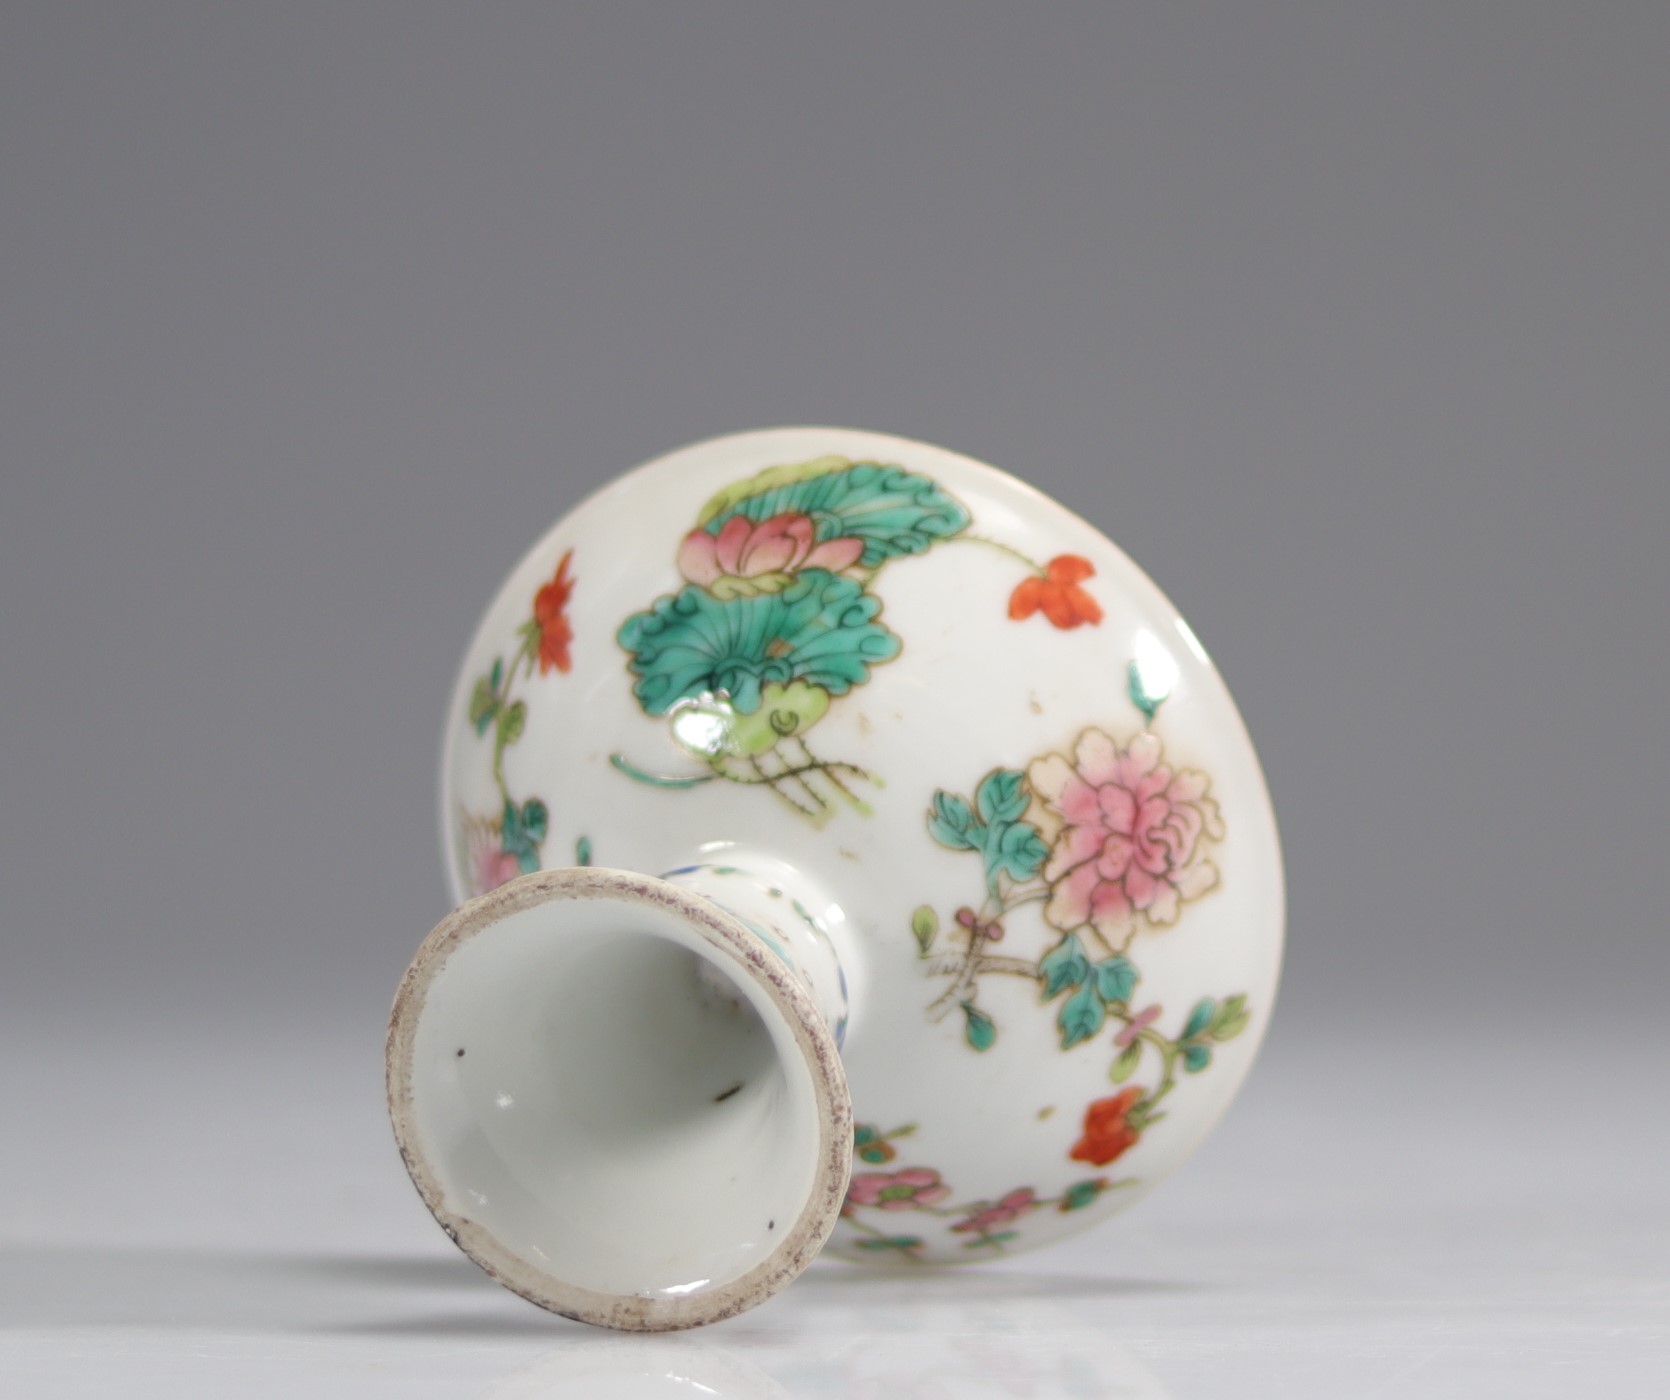 19th century Chinese porcelain bowl - Image 3 of 4